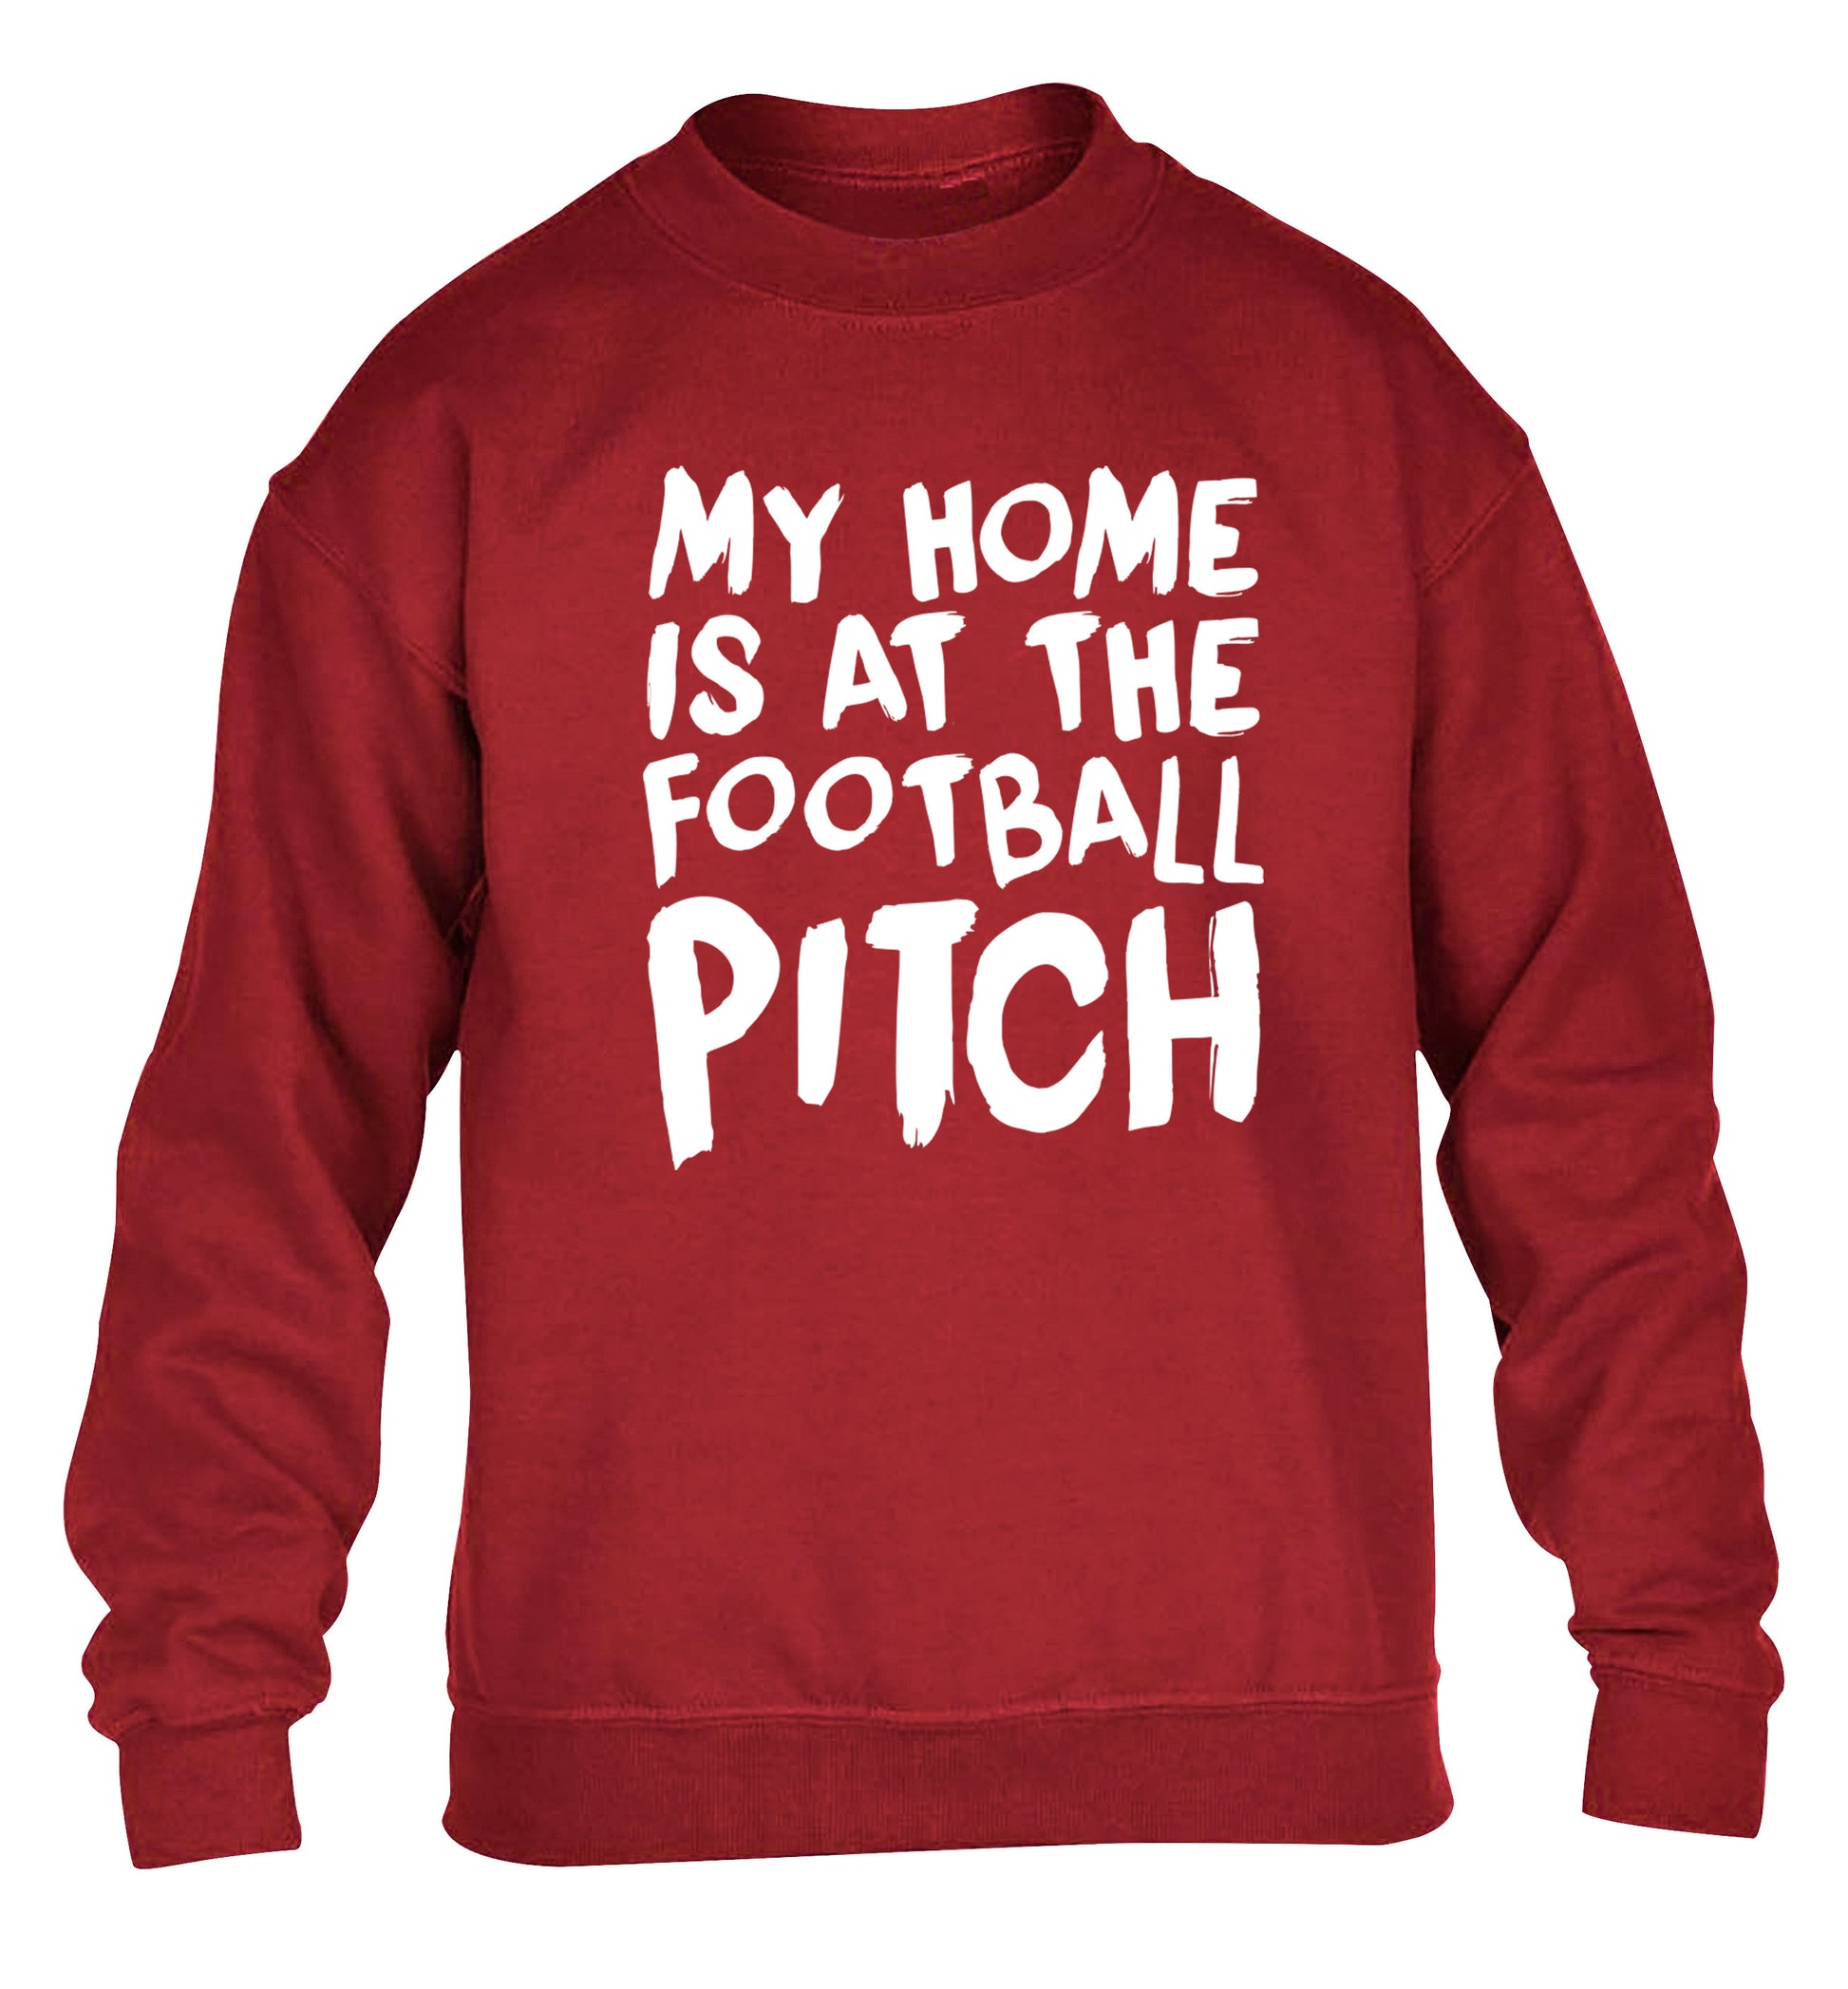 My home is at the football pitch children's grey sweater 12-14 Years